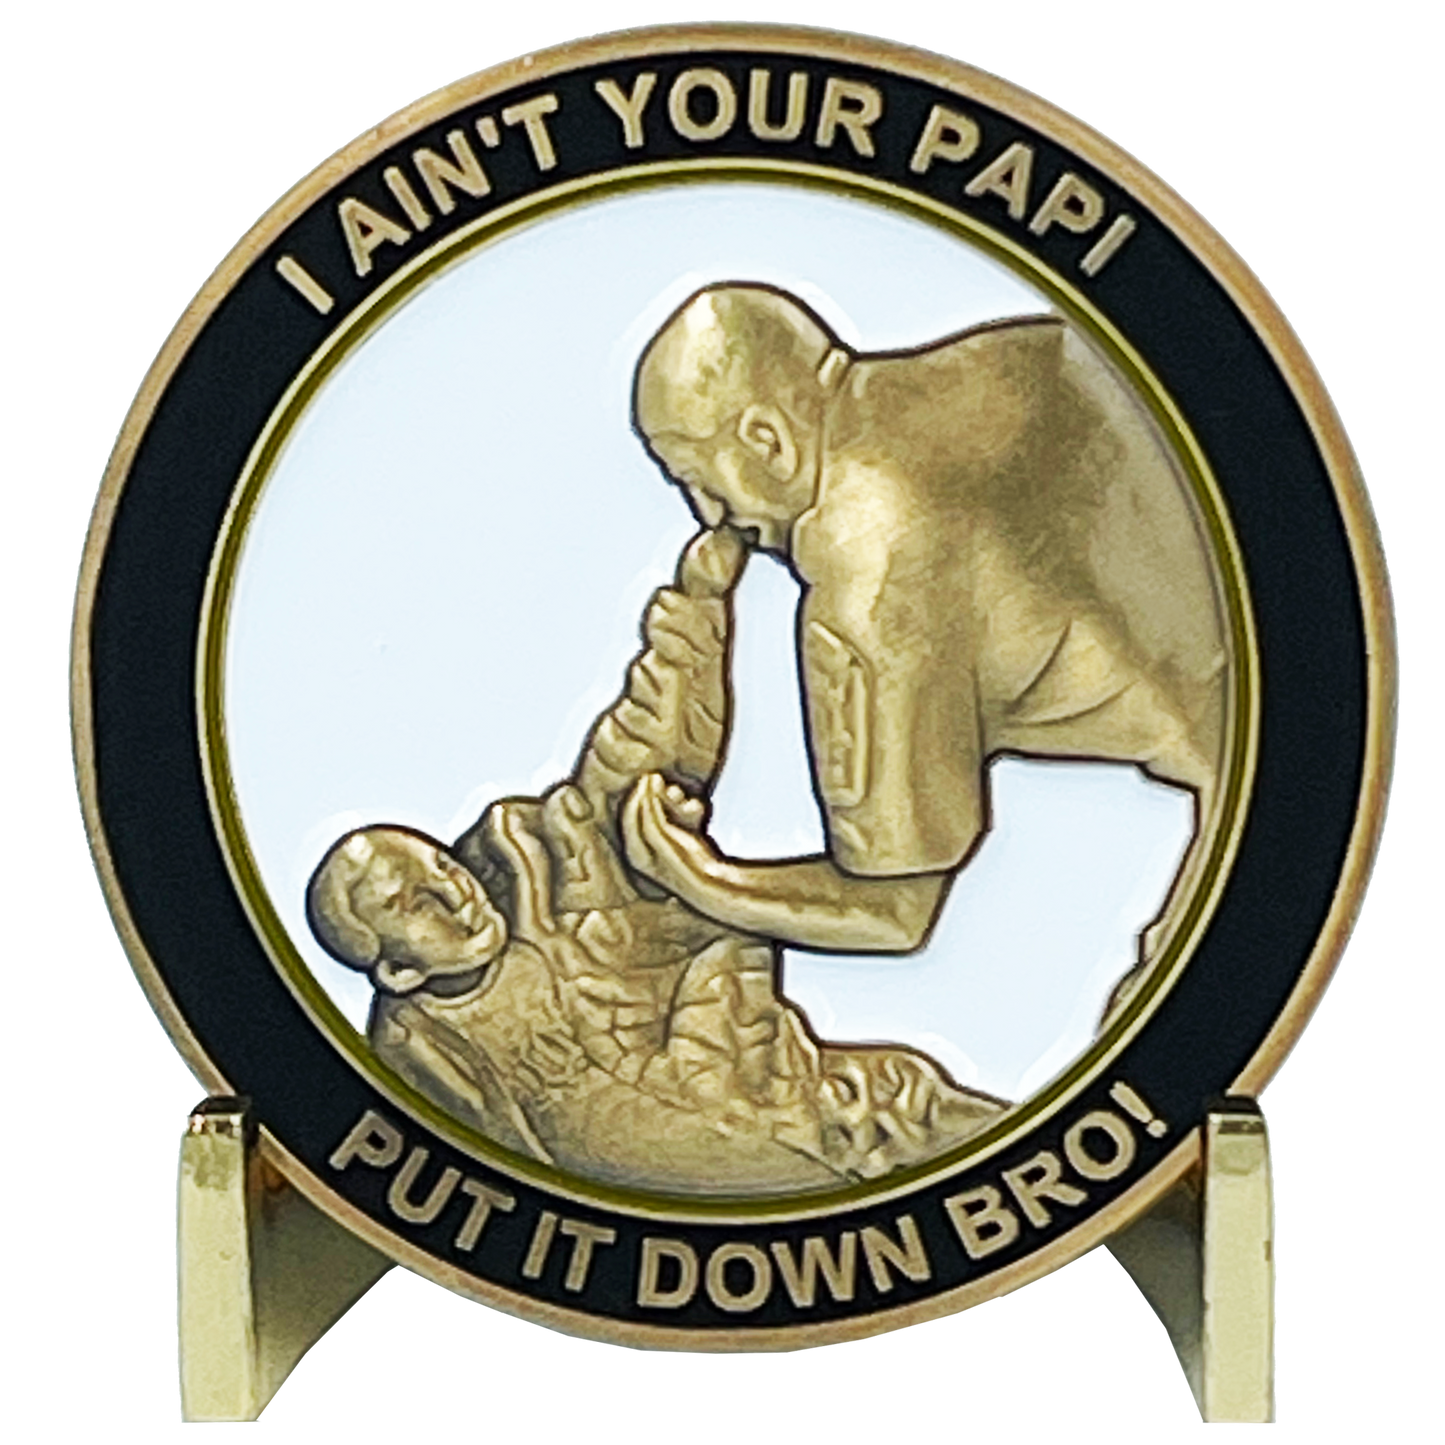 BL9-008 I AIN'T YOUR PAPI Passaic County Sheriff Challenge Coin 911 COPS inspired by Officer Anthony Damiano